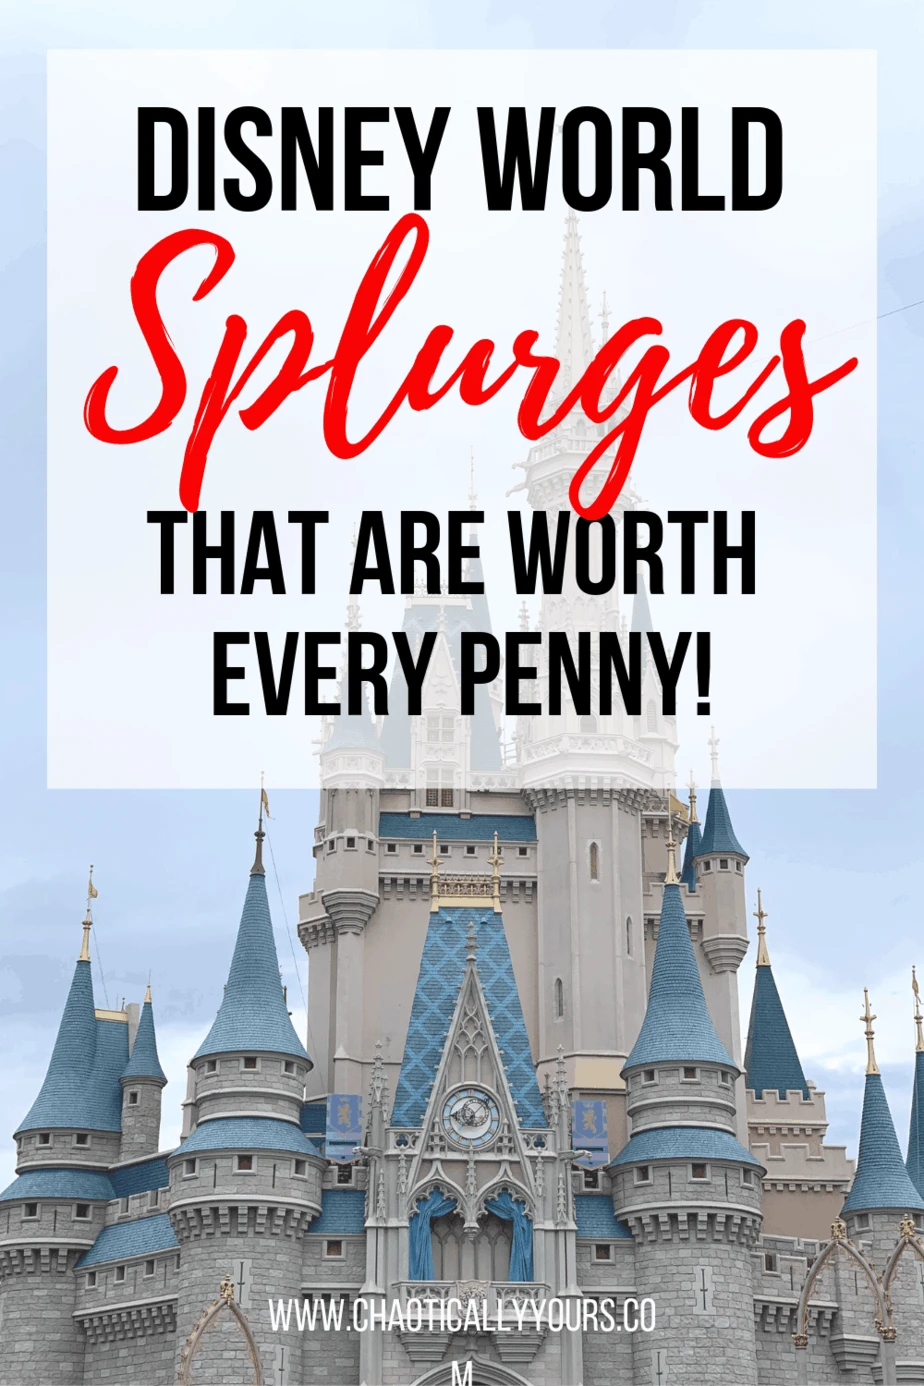 Disney World Splurges That Are Worth Every Penny!